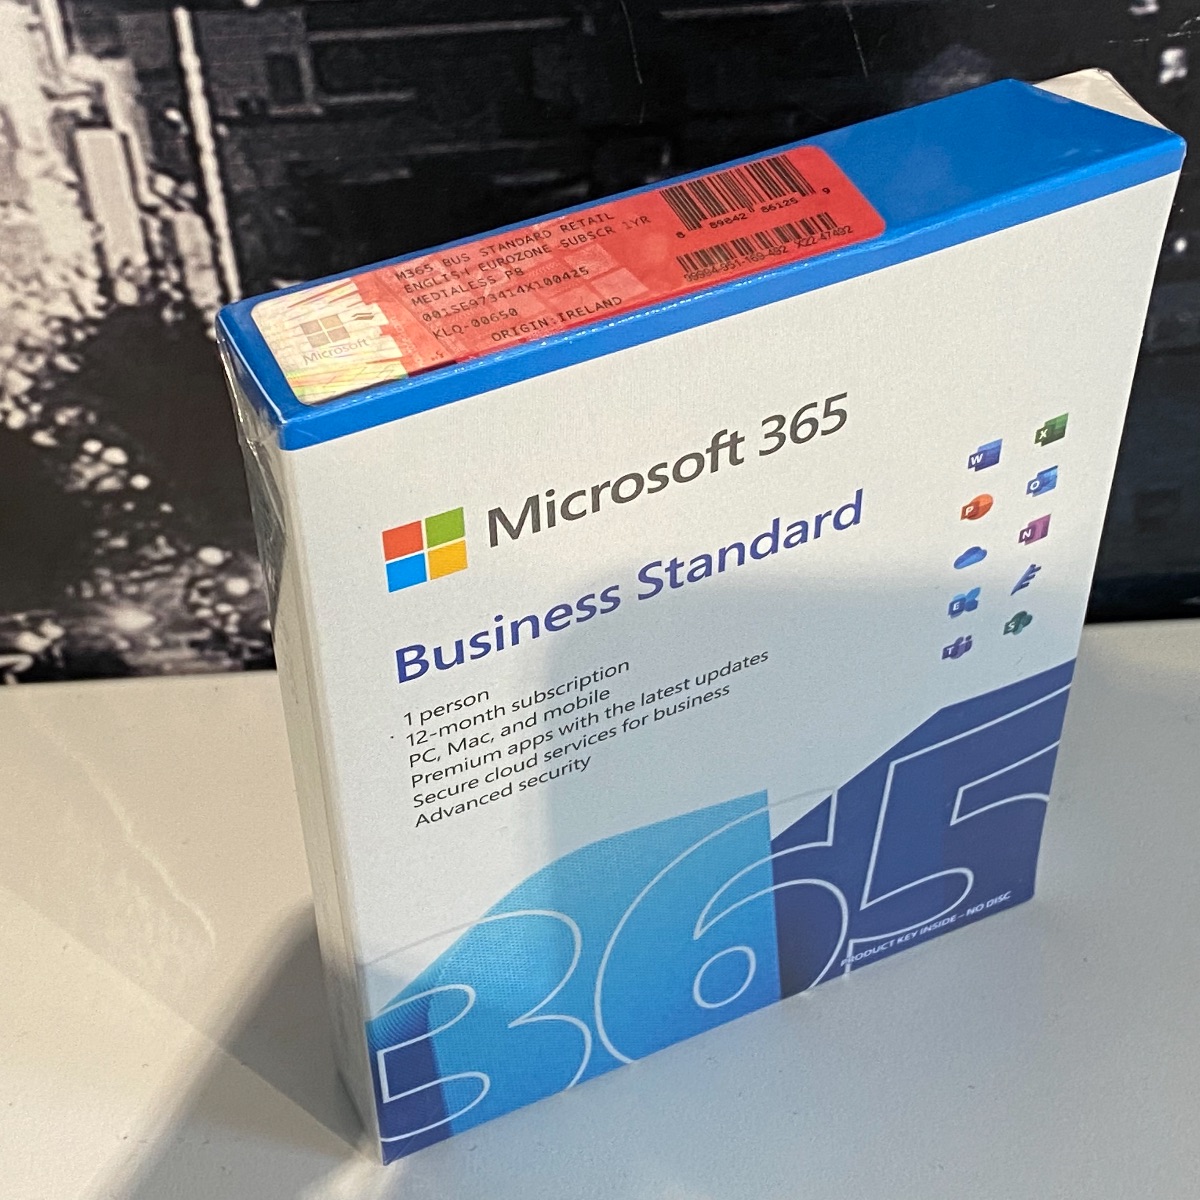 Microsoft Office 365 Business Standard Subscription Word Excel Outlook Sealed KLQ-00650 889842861259 (Brand New & Sealed)